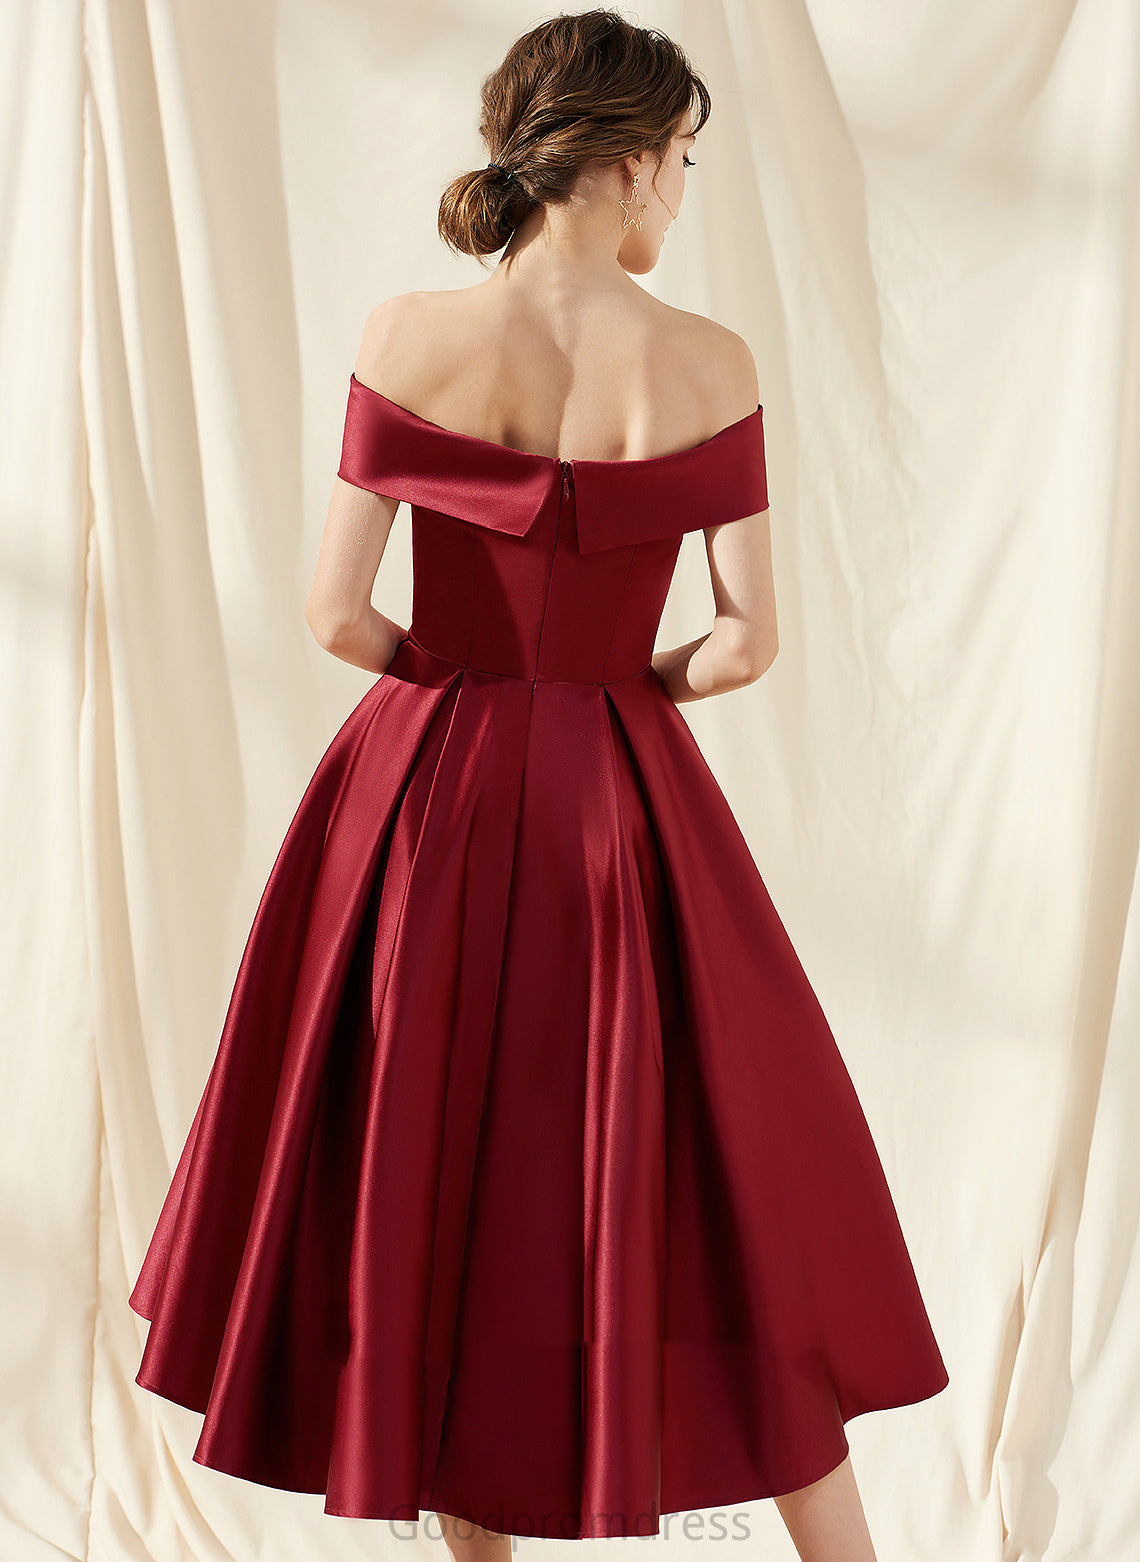 Dress Karli Asymmetrical Homecoming Dresses A-Line Pockets With Off-the-Shoulder Homecoming Satin